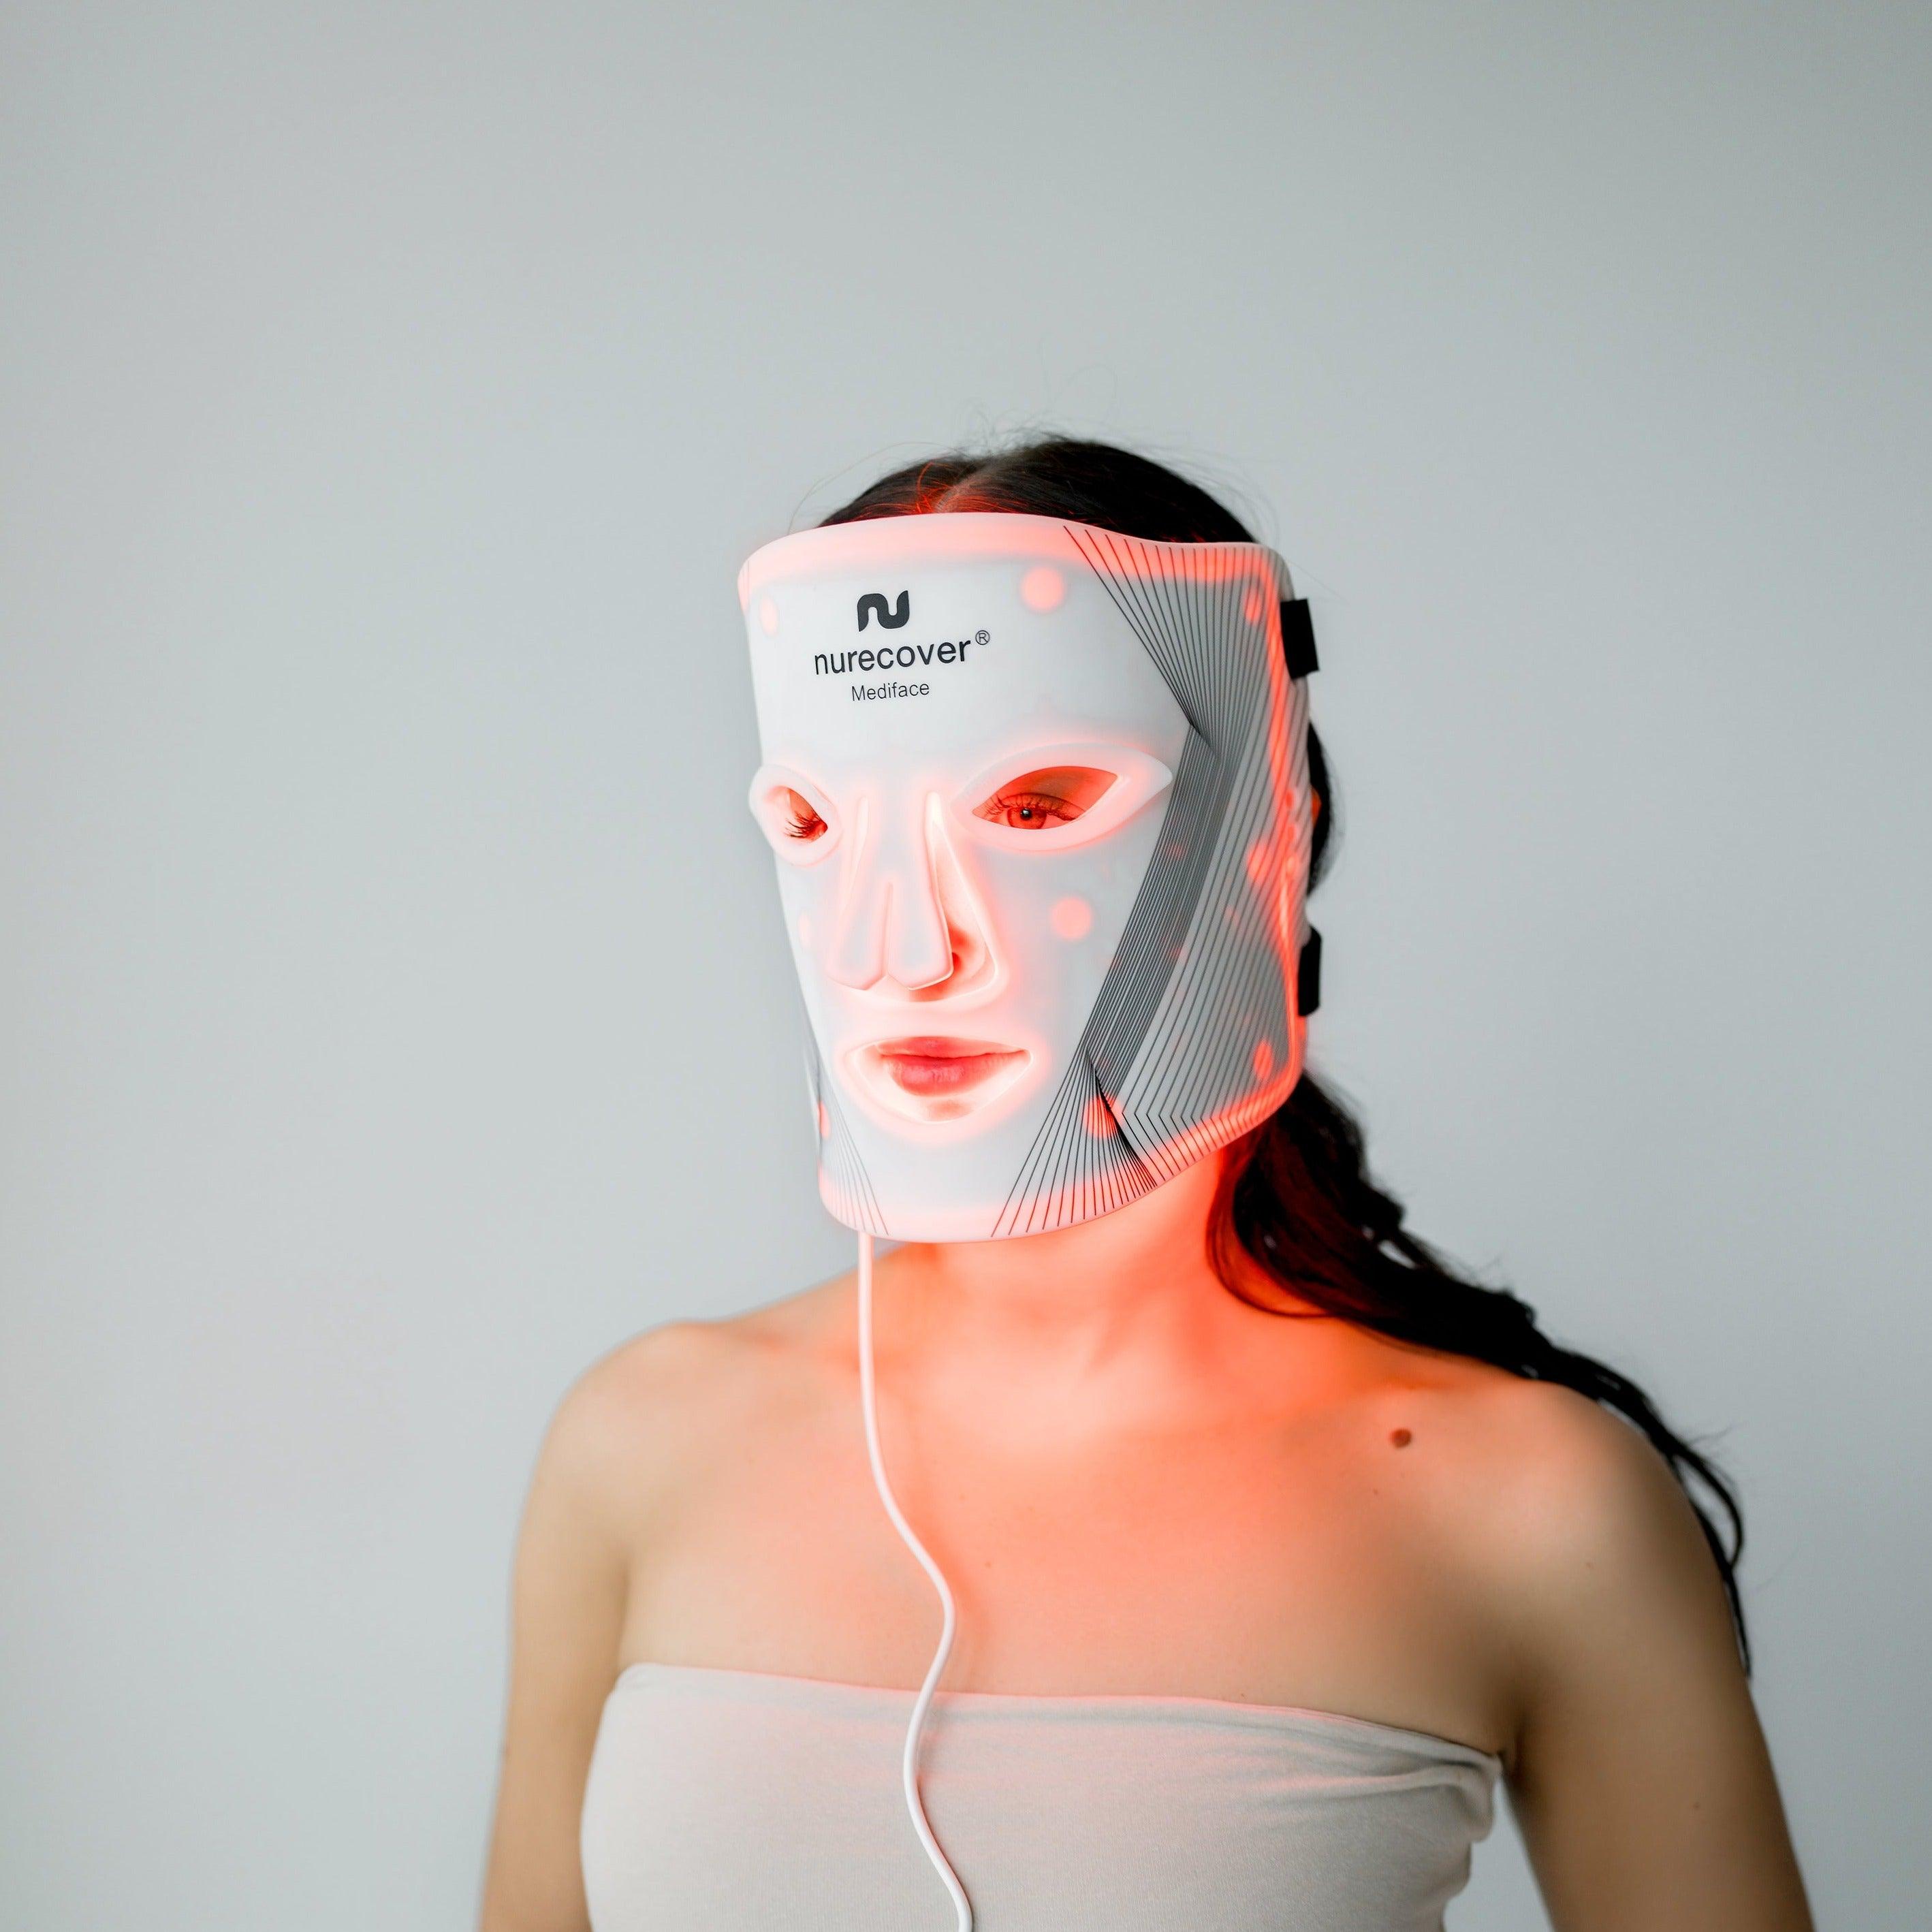 nurecover Mediface® - 3-in-1 LED Light Therapy Face Mask - nurecover